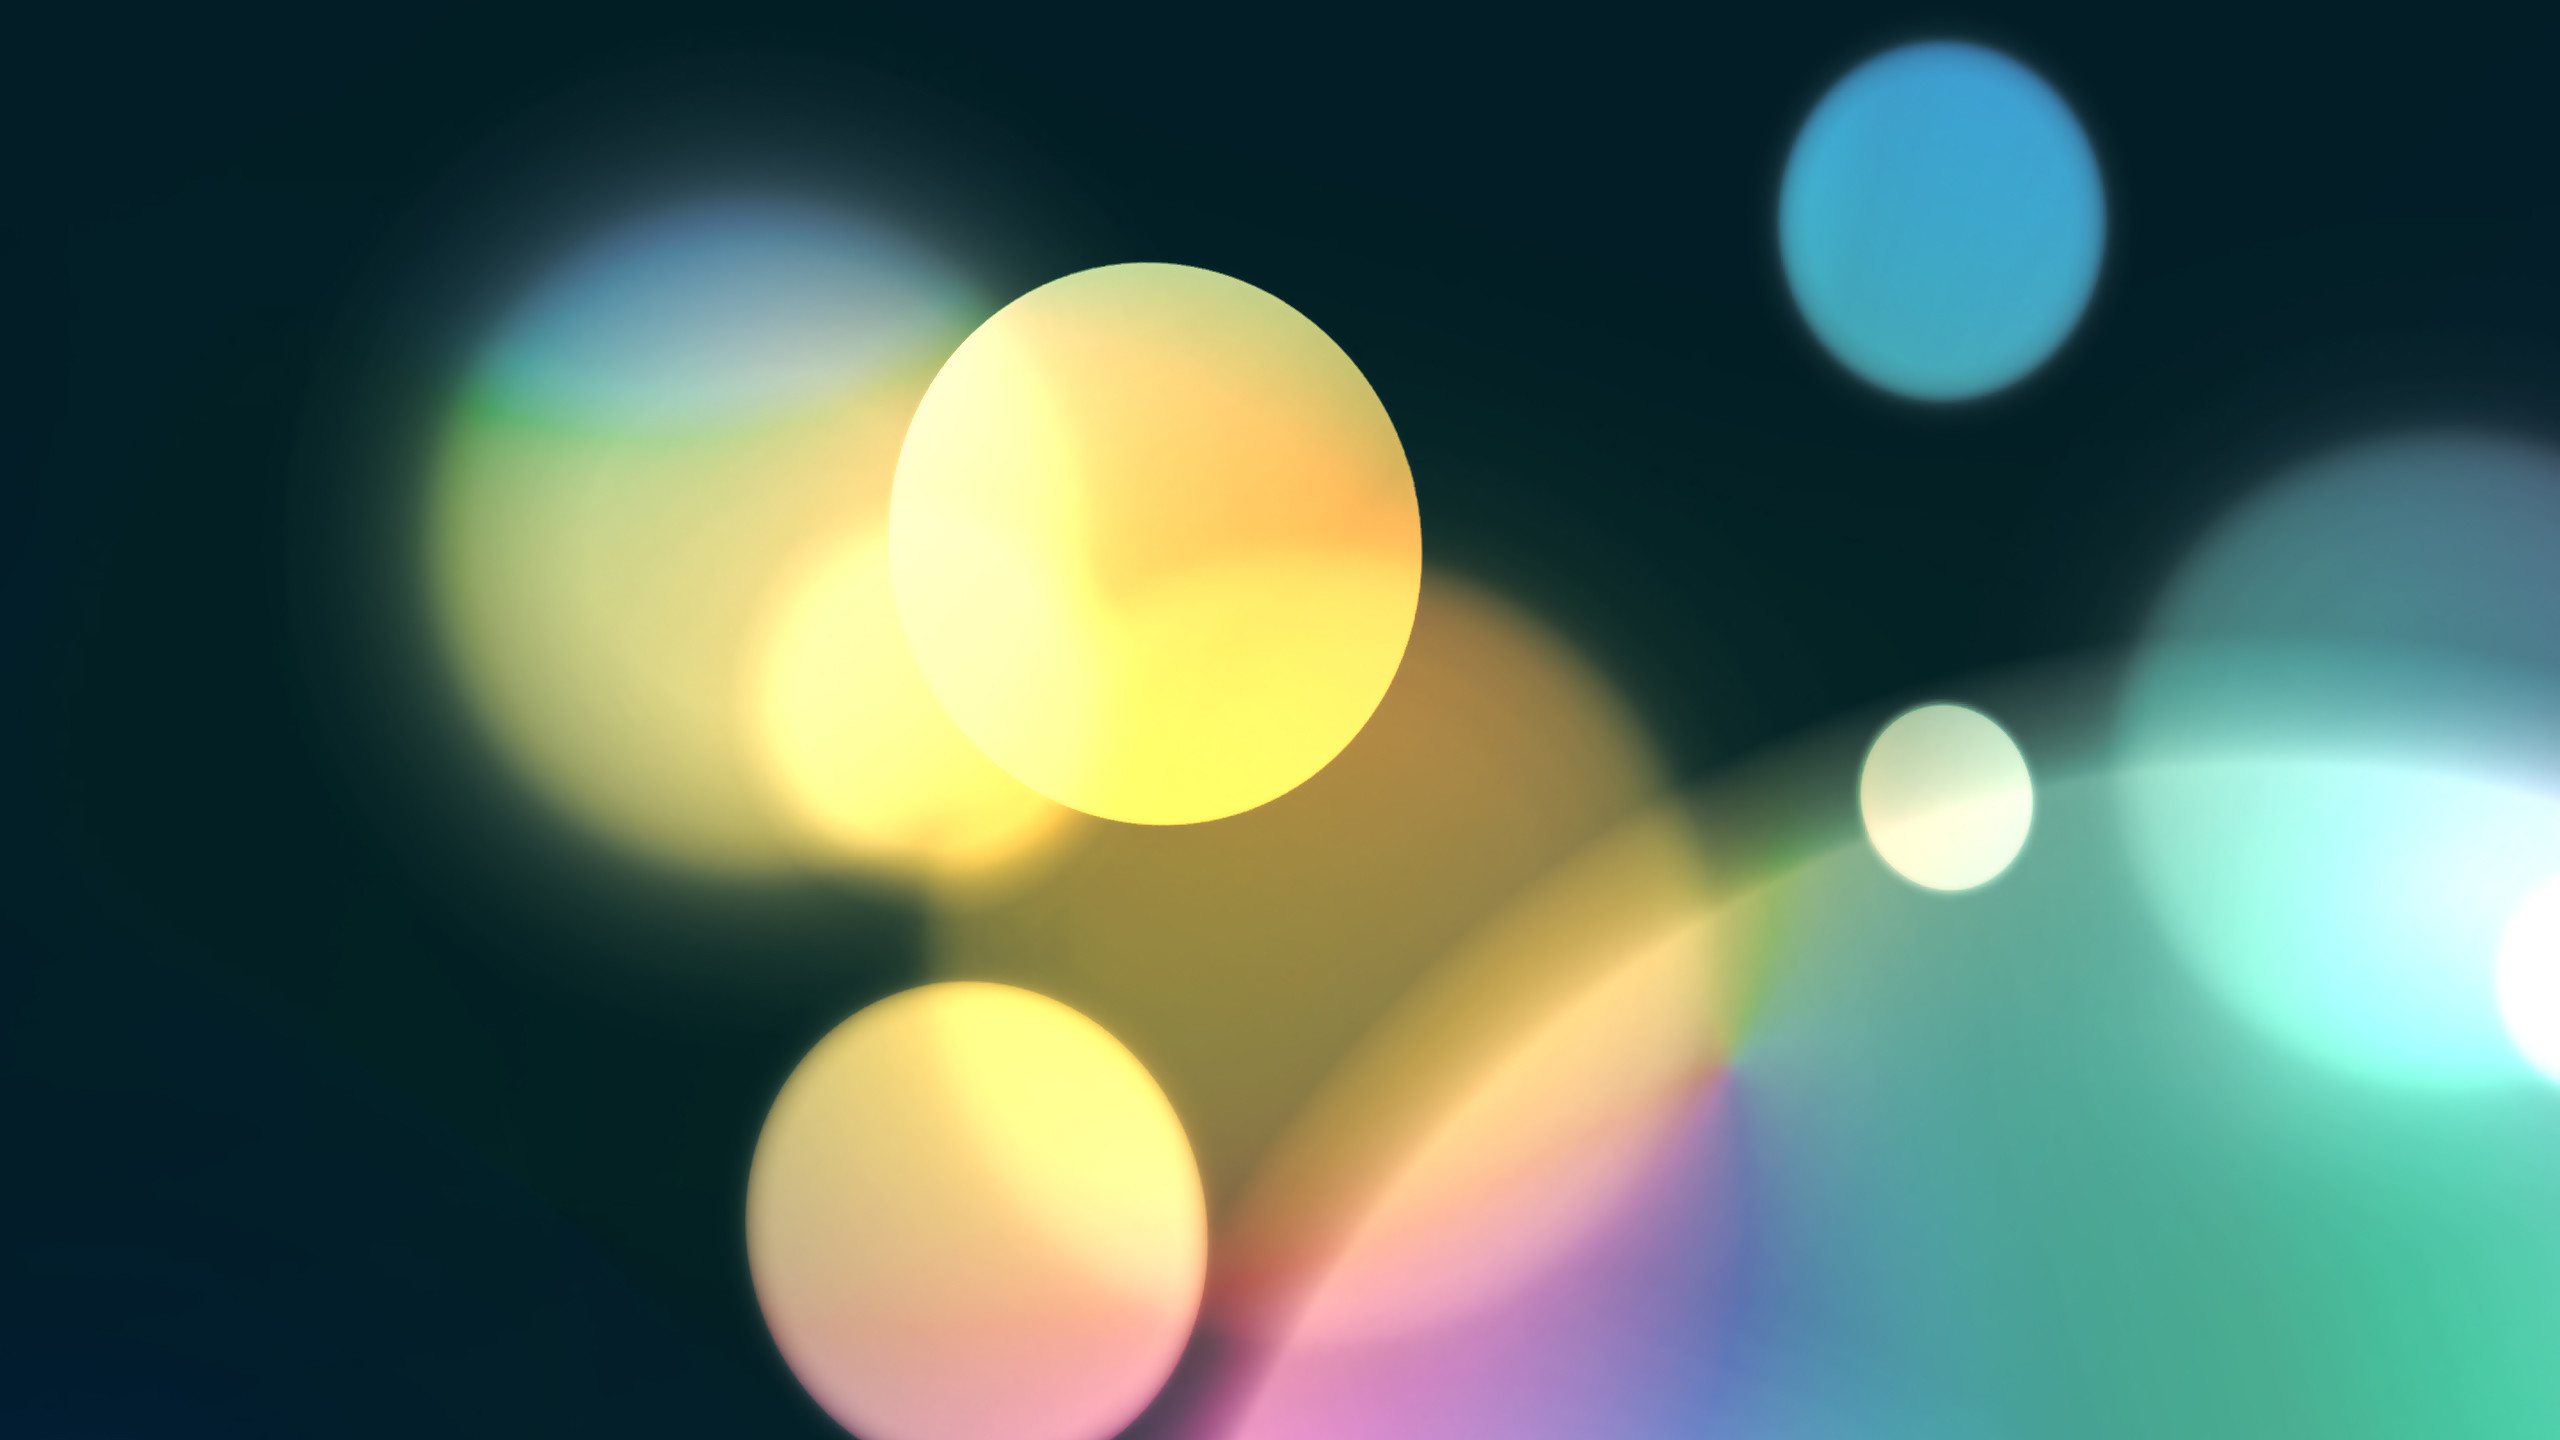 2560x1440 Nexus 7 Jelly Bean Android abstract wallpaper